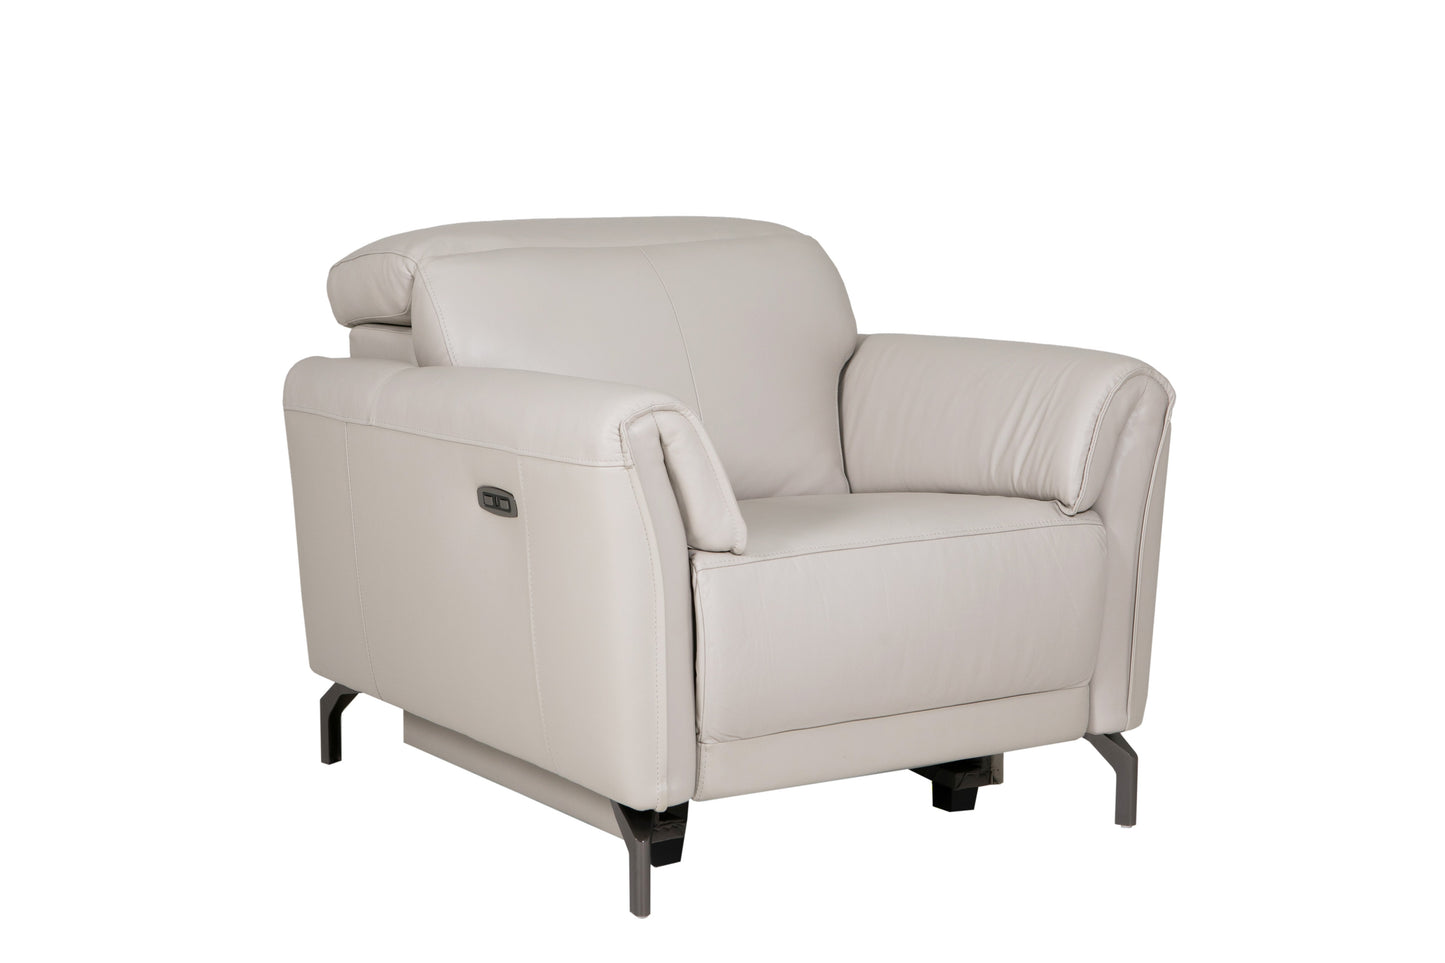 Naples 1 Seater - Cashmere 20% OFF